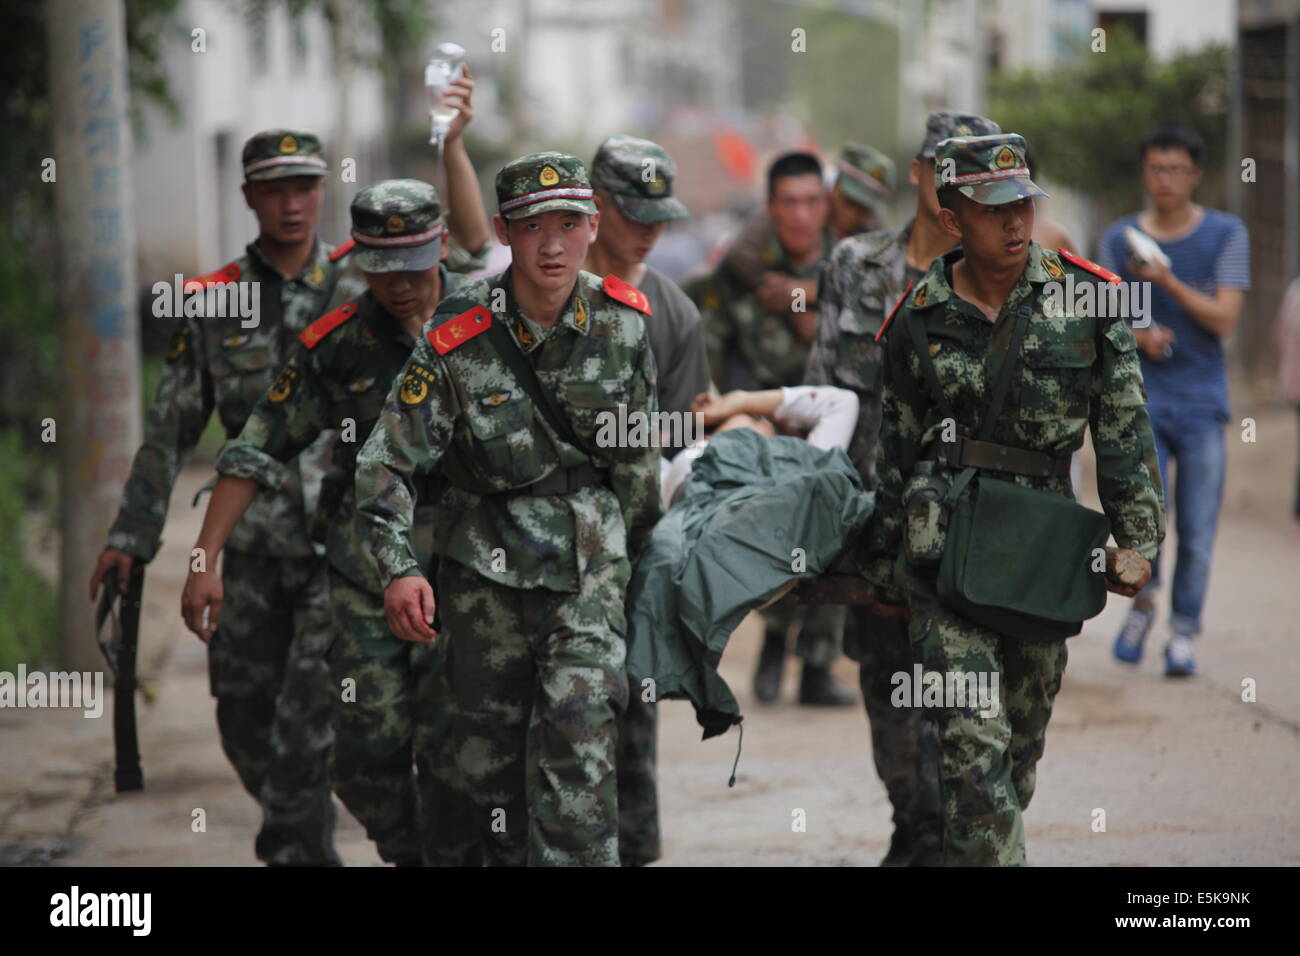 Zhaotong. 3rd Aug, 2014. Rescuers transport injured people after an earthquake in Ludian County of Zhaotong City in southwest China's Yunnan Province, Aug. 3, 2014. A 6.5-magnitude earthquake jolted Ludian County at 4:30 p.m. Sunday (Beijing Time), said the China Earthquake Networks Center (CENC). The Ministry of Civil Affairs has reported that the updated number of casualty is 175 dead and 181 missing. Credit:  Zhang Guangyu/Xinhua/Alamy Live News Stock Photo